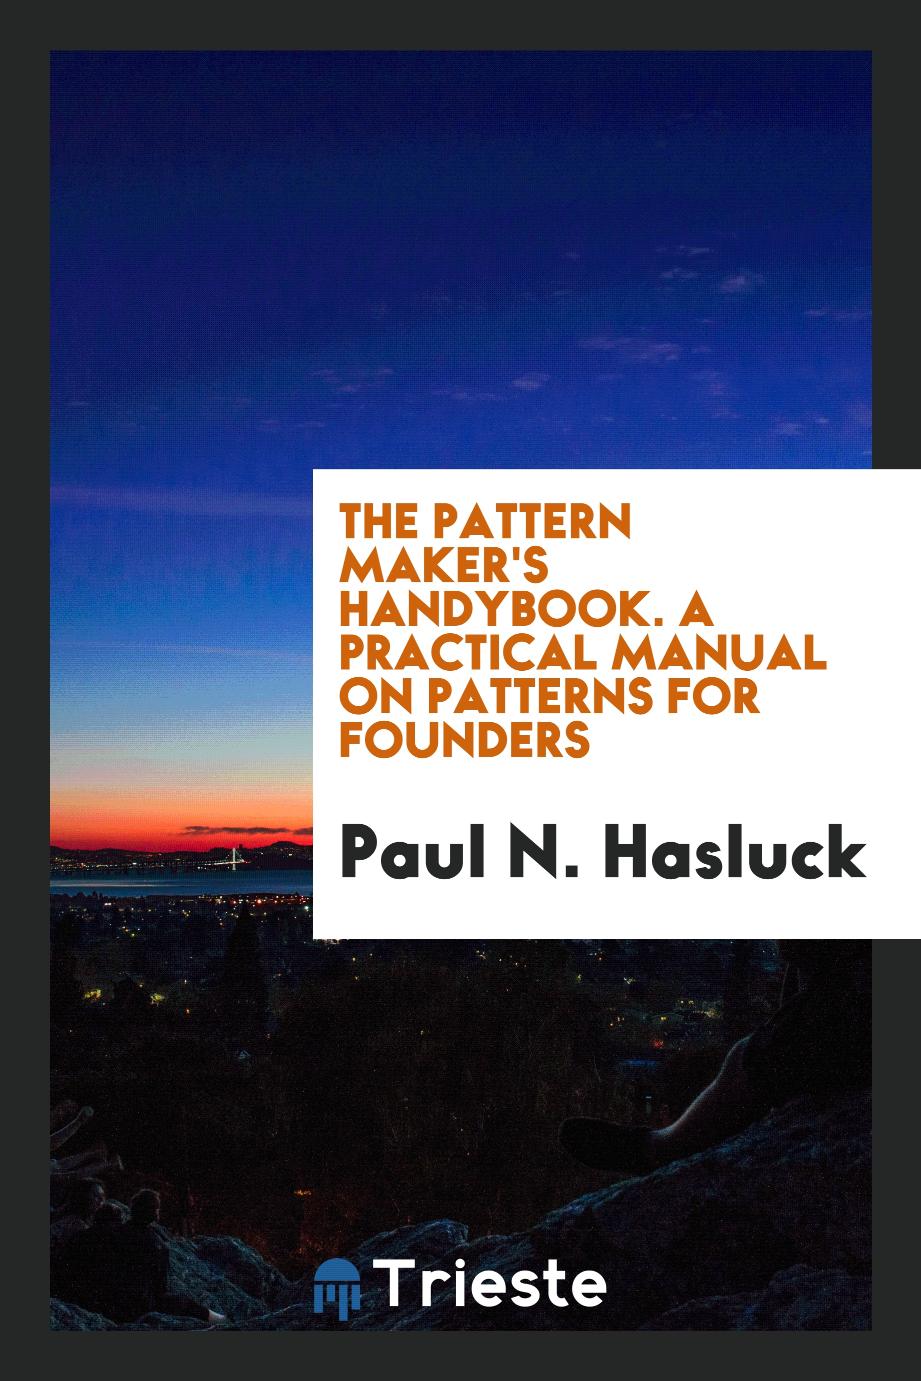 The pattern maker's handybook. A practical manual on patterns for founders